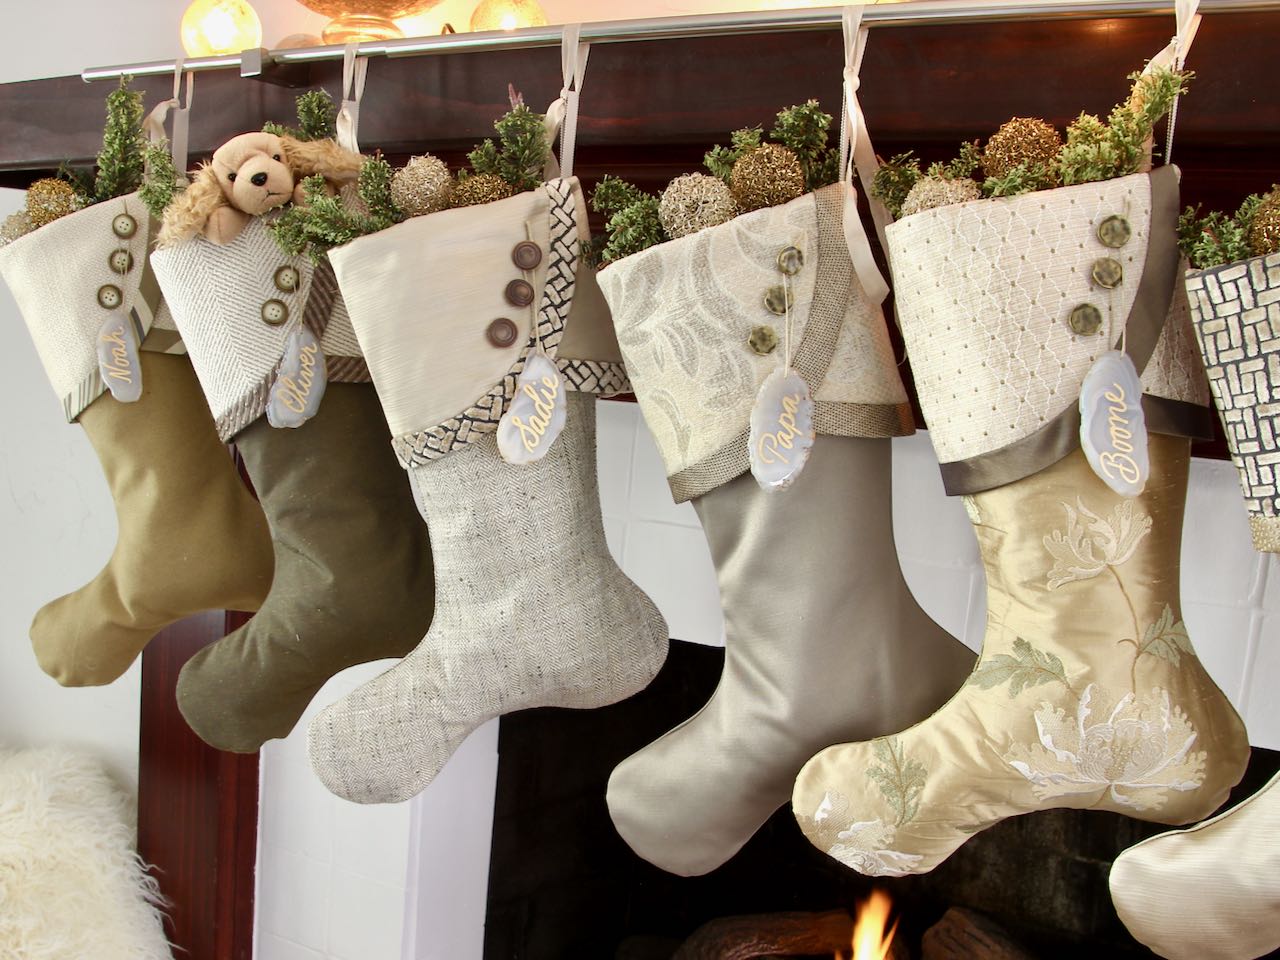 5 coordinating yet unique Christmas stockings are hanging from a mantel above a fire. Agate slice name tags hang from the top of three buttons on each cuff